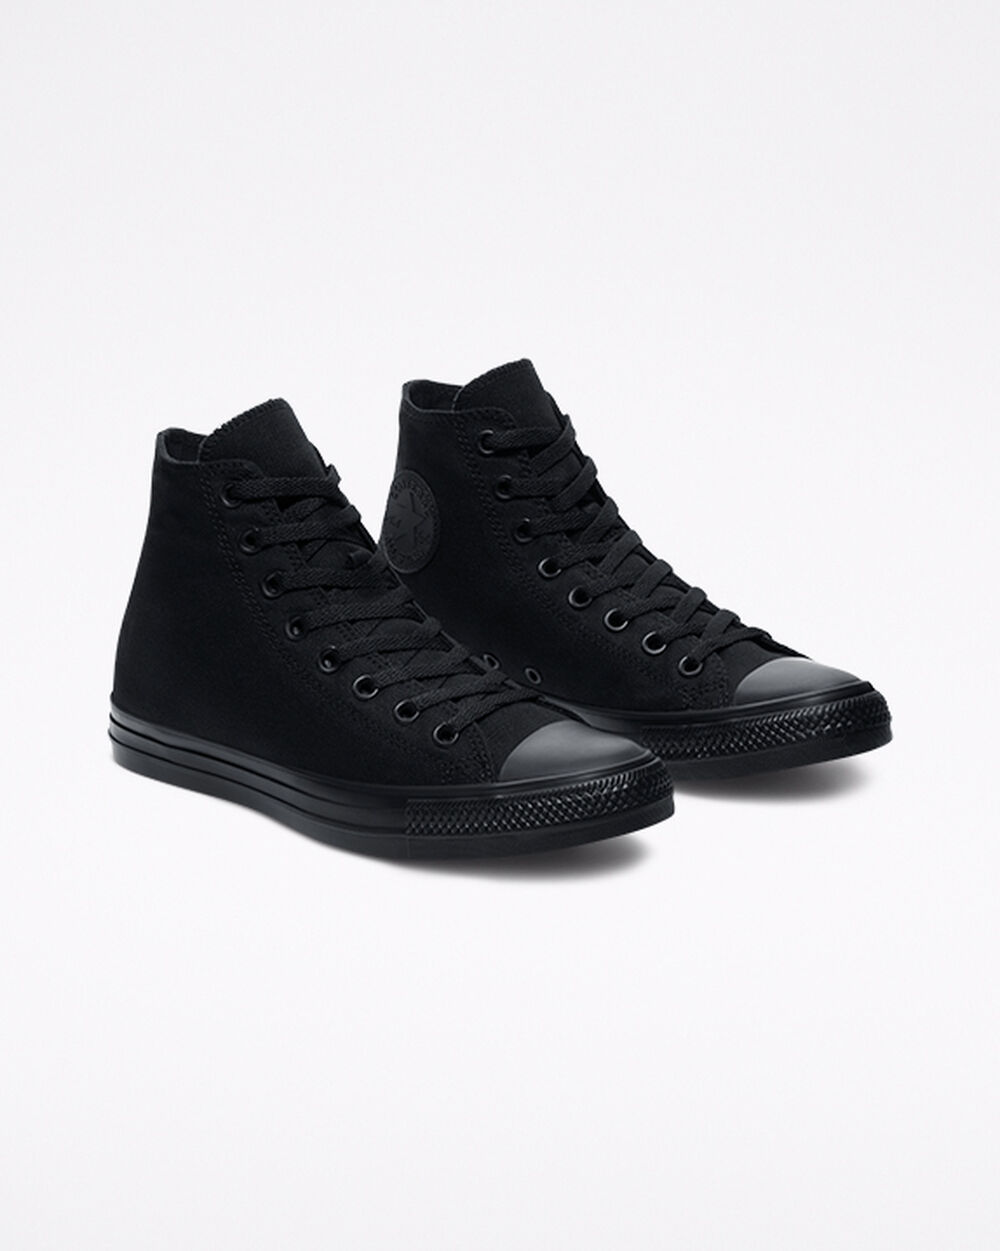 Tenis Converse Chuck Taylor All Star Mujer Negros | Mexico-306726